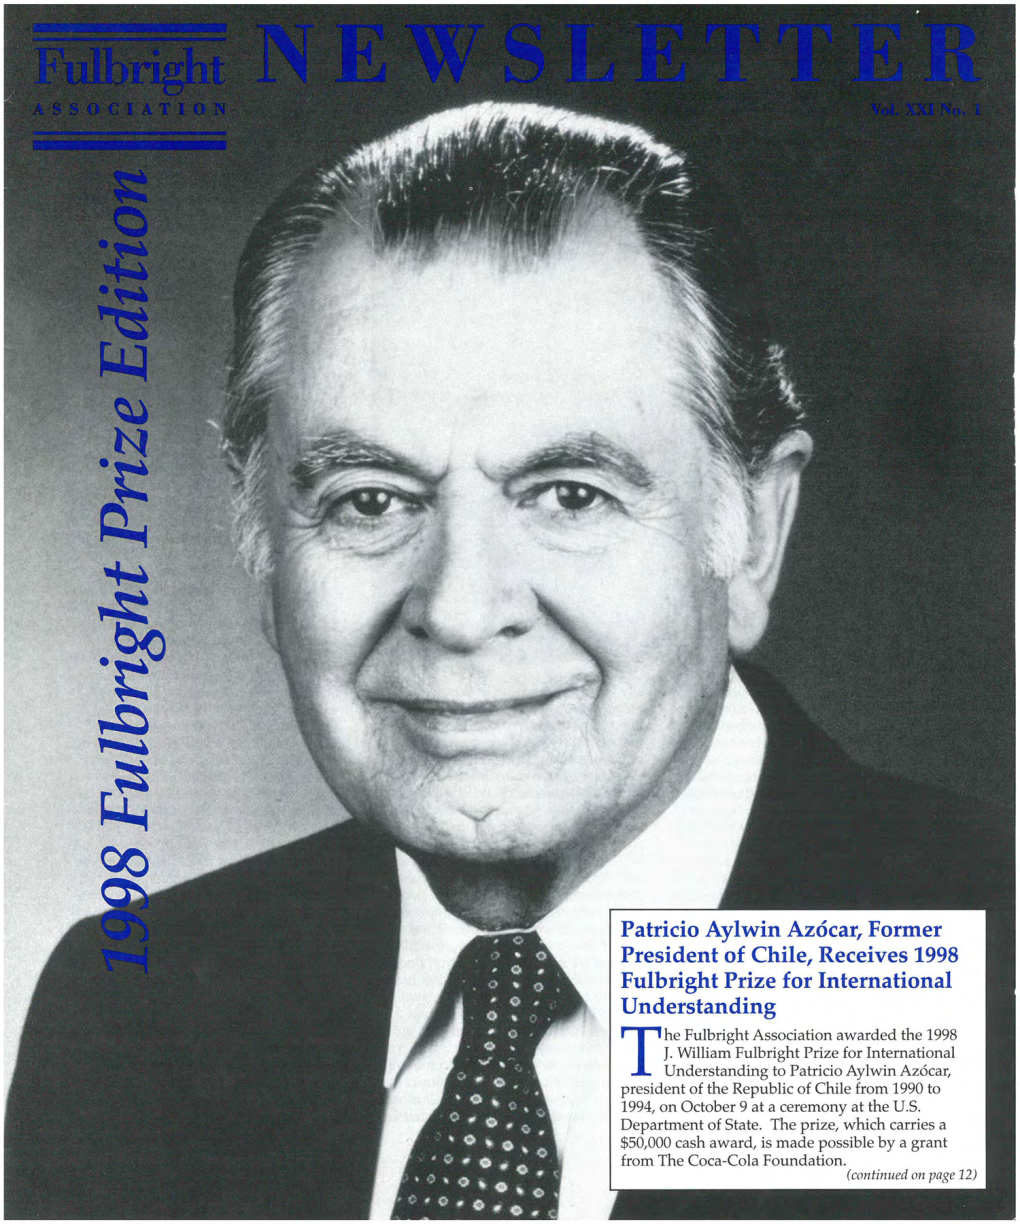 Patricio Aylwin Az6car, Former President of Chile, Receives 1998 Fulbright Prize for International Understanding He Fulbright Association Awarded the 1998 J